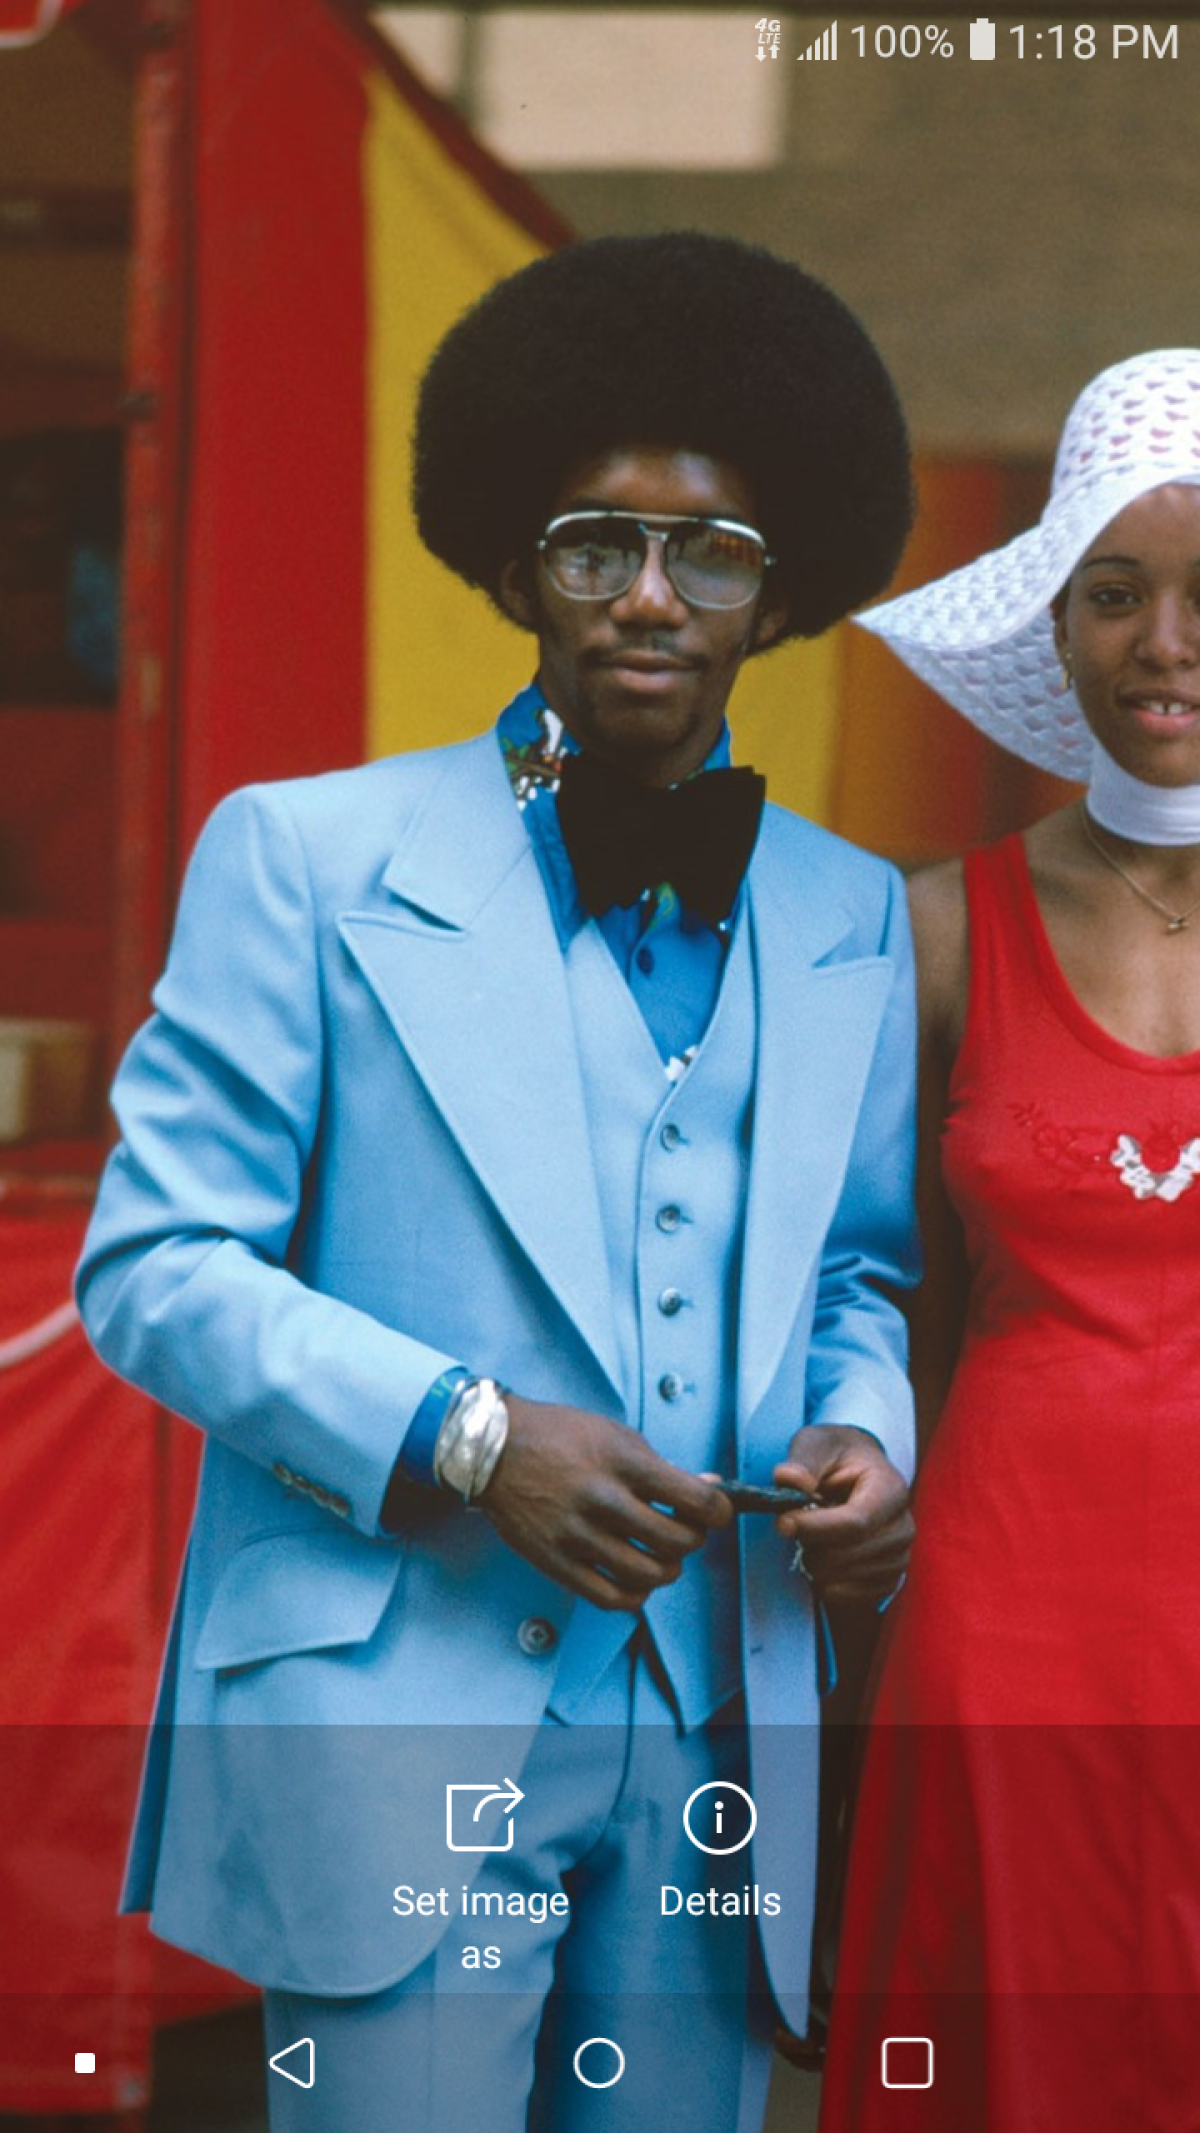 A man in a powder blue suit photographed in Chicago in 1975